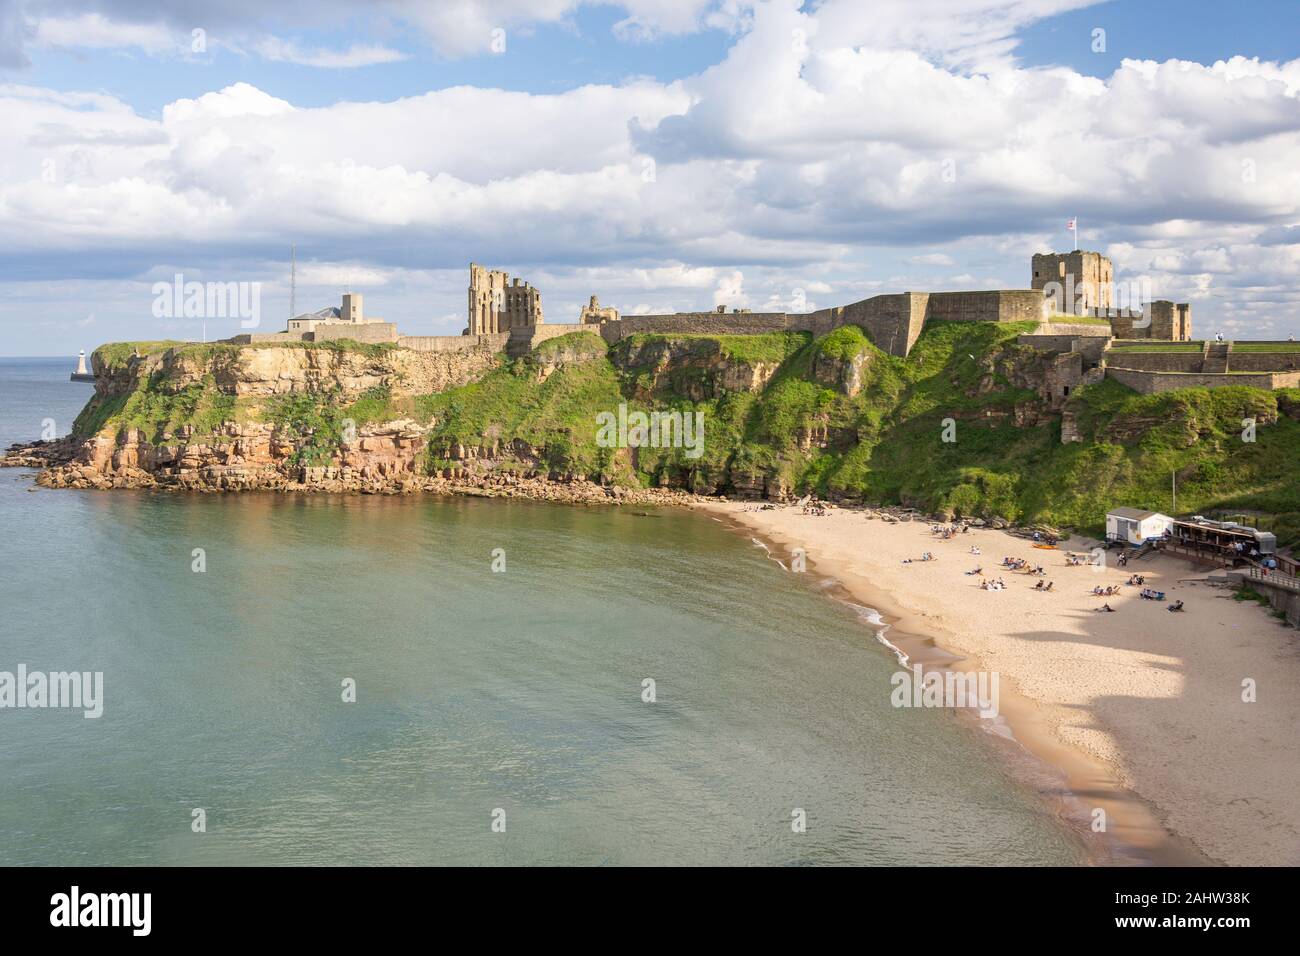 Tynemouth Priory and Castle and King Edward's Bay, Tynemouth, Tyne and Wear, England, United Kingdom Stock Photo